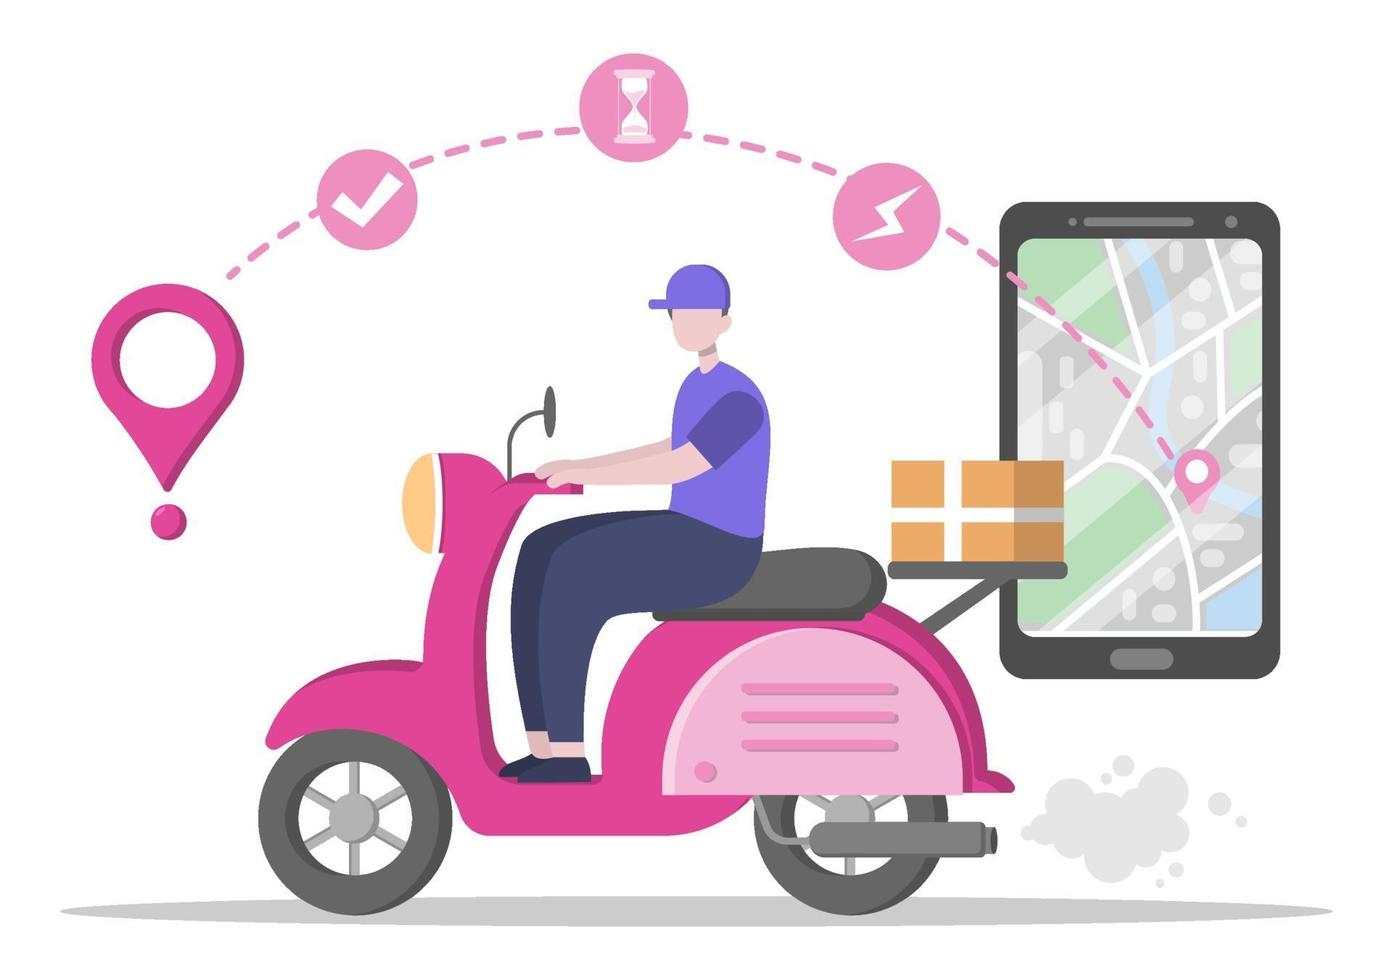 Flat Illustration of Online Delivery for Order Tracking, Courier Service, Goods Shipping, City Logistics using a Truck or Motorcycle vector